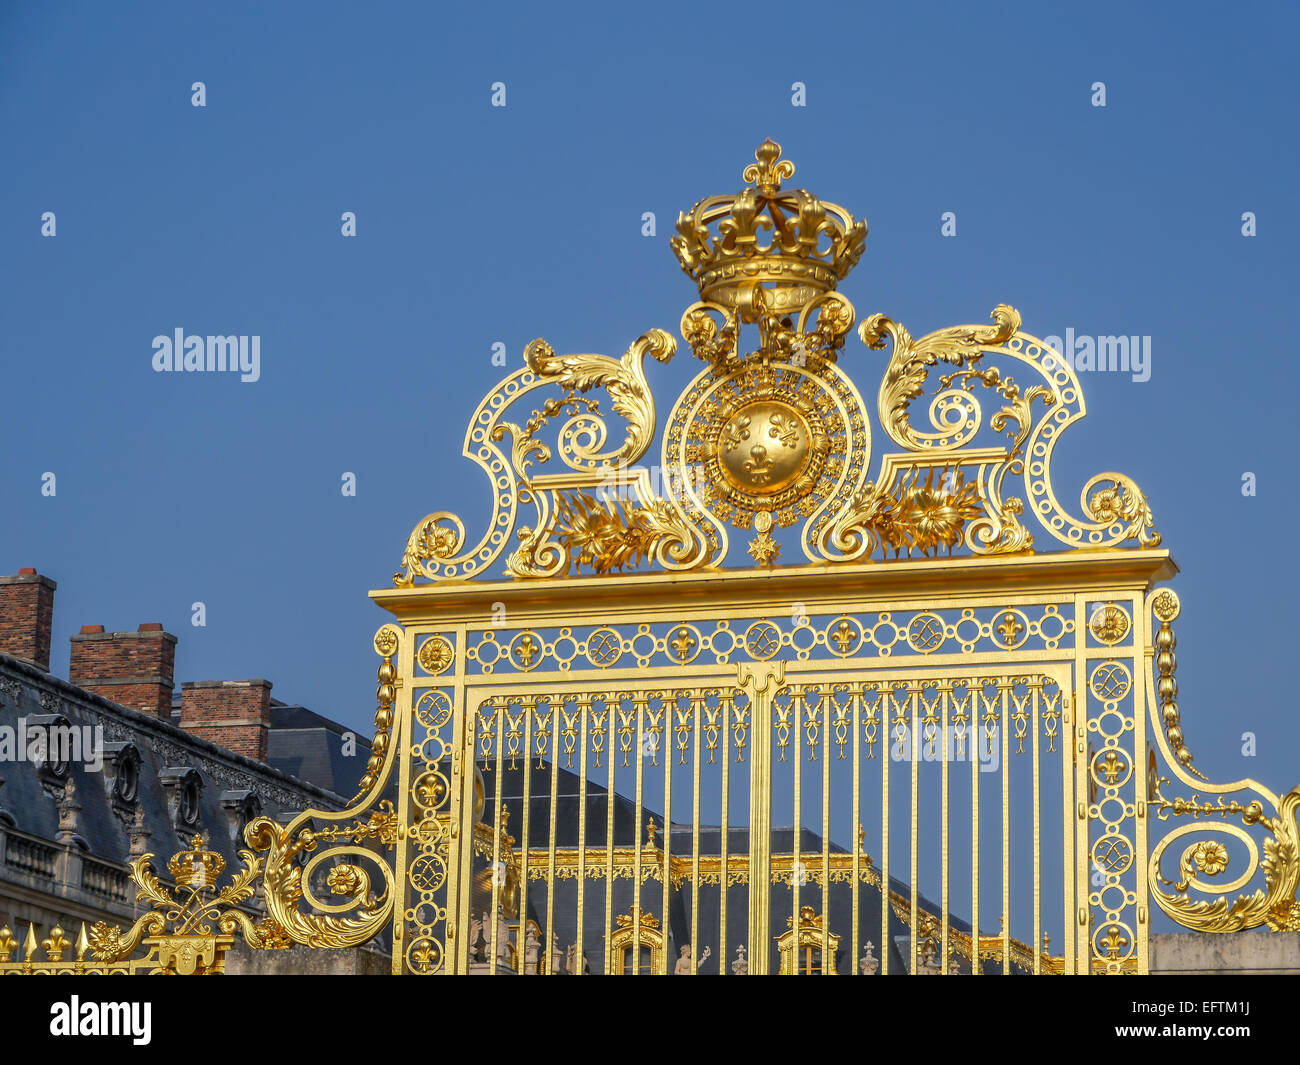 Ornamental golden front gate of Versailles Palace, France Stock Photo